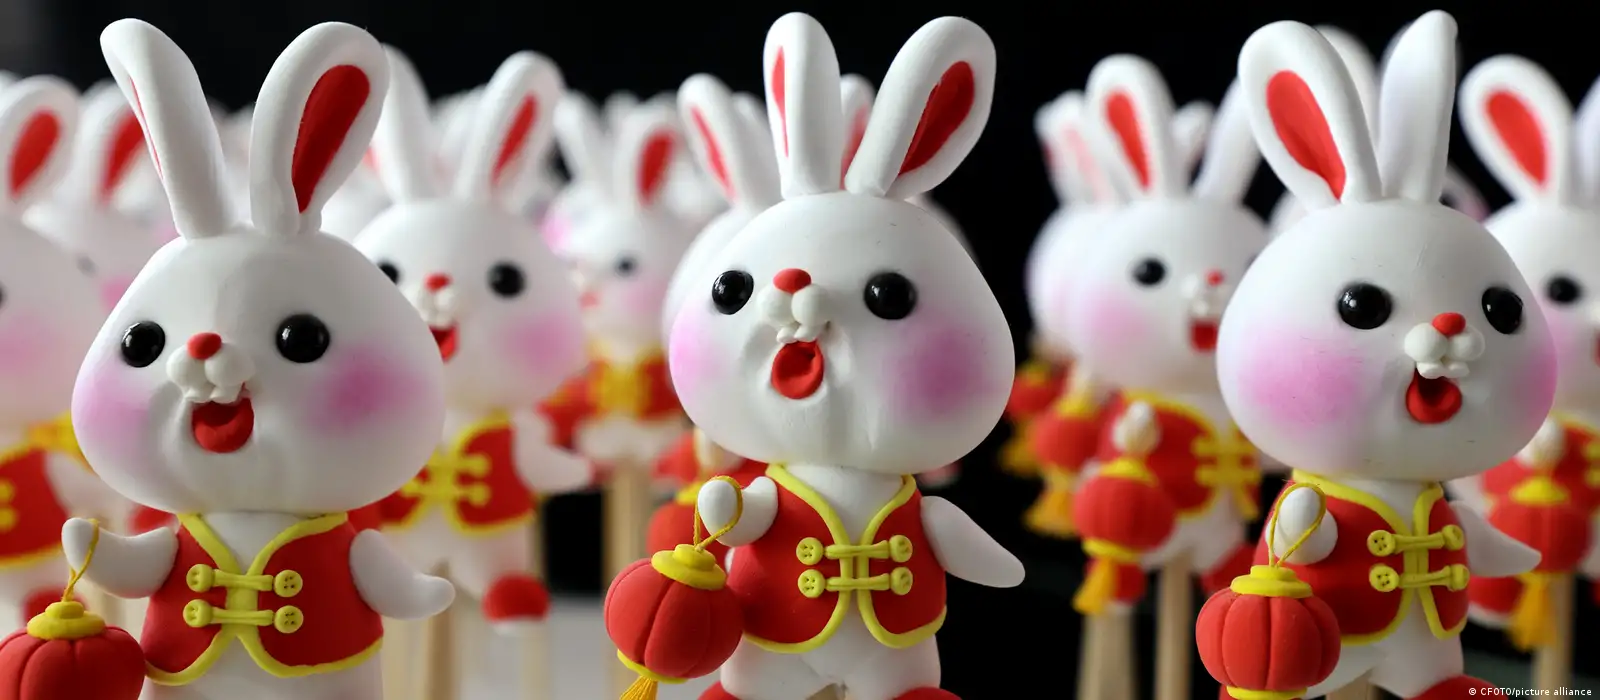 The Best Lunar New Year Gifts for the Year of the Rabbit